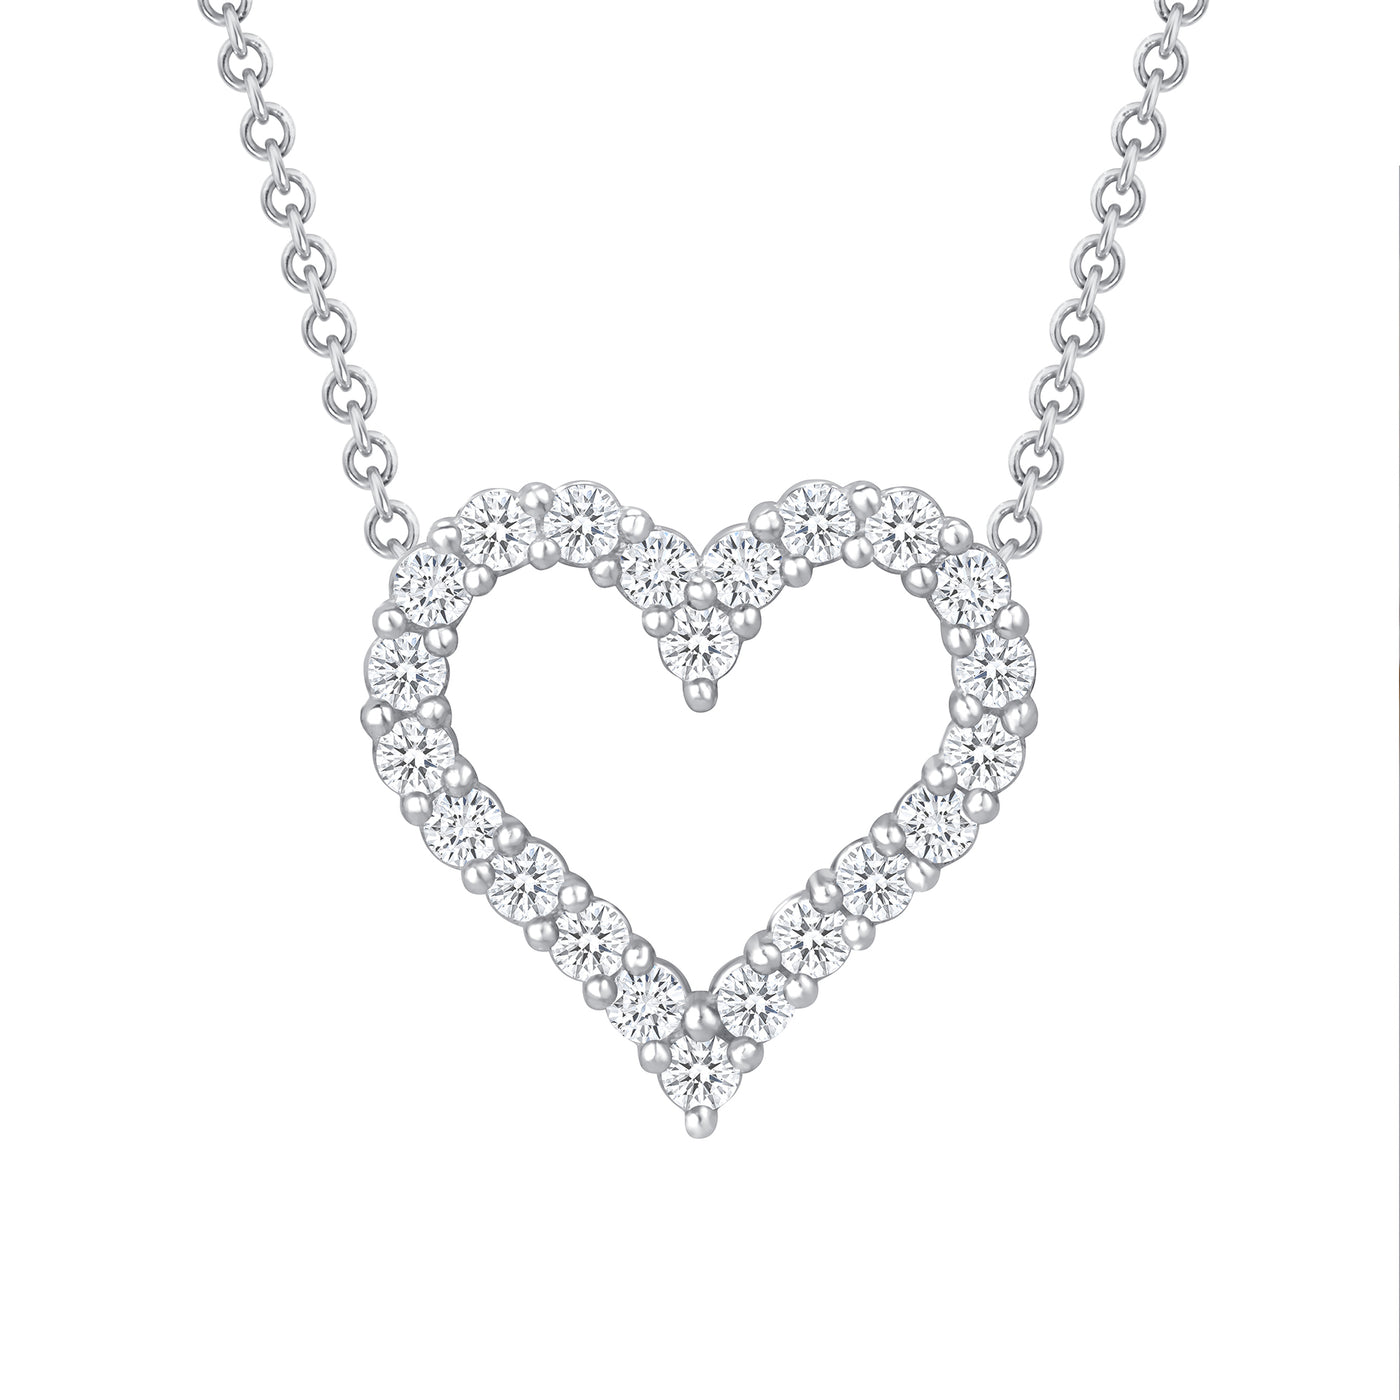 Diamond Heart Pendant 0.23 Carat Round Cut in Yellow, Rose or White Gold 16" Chain